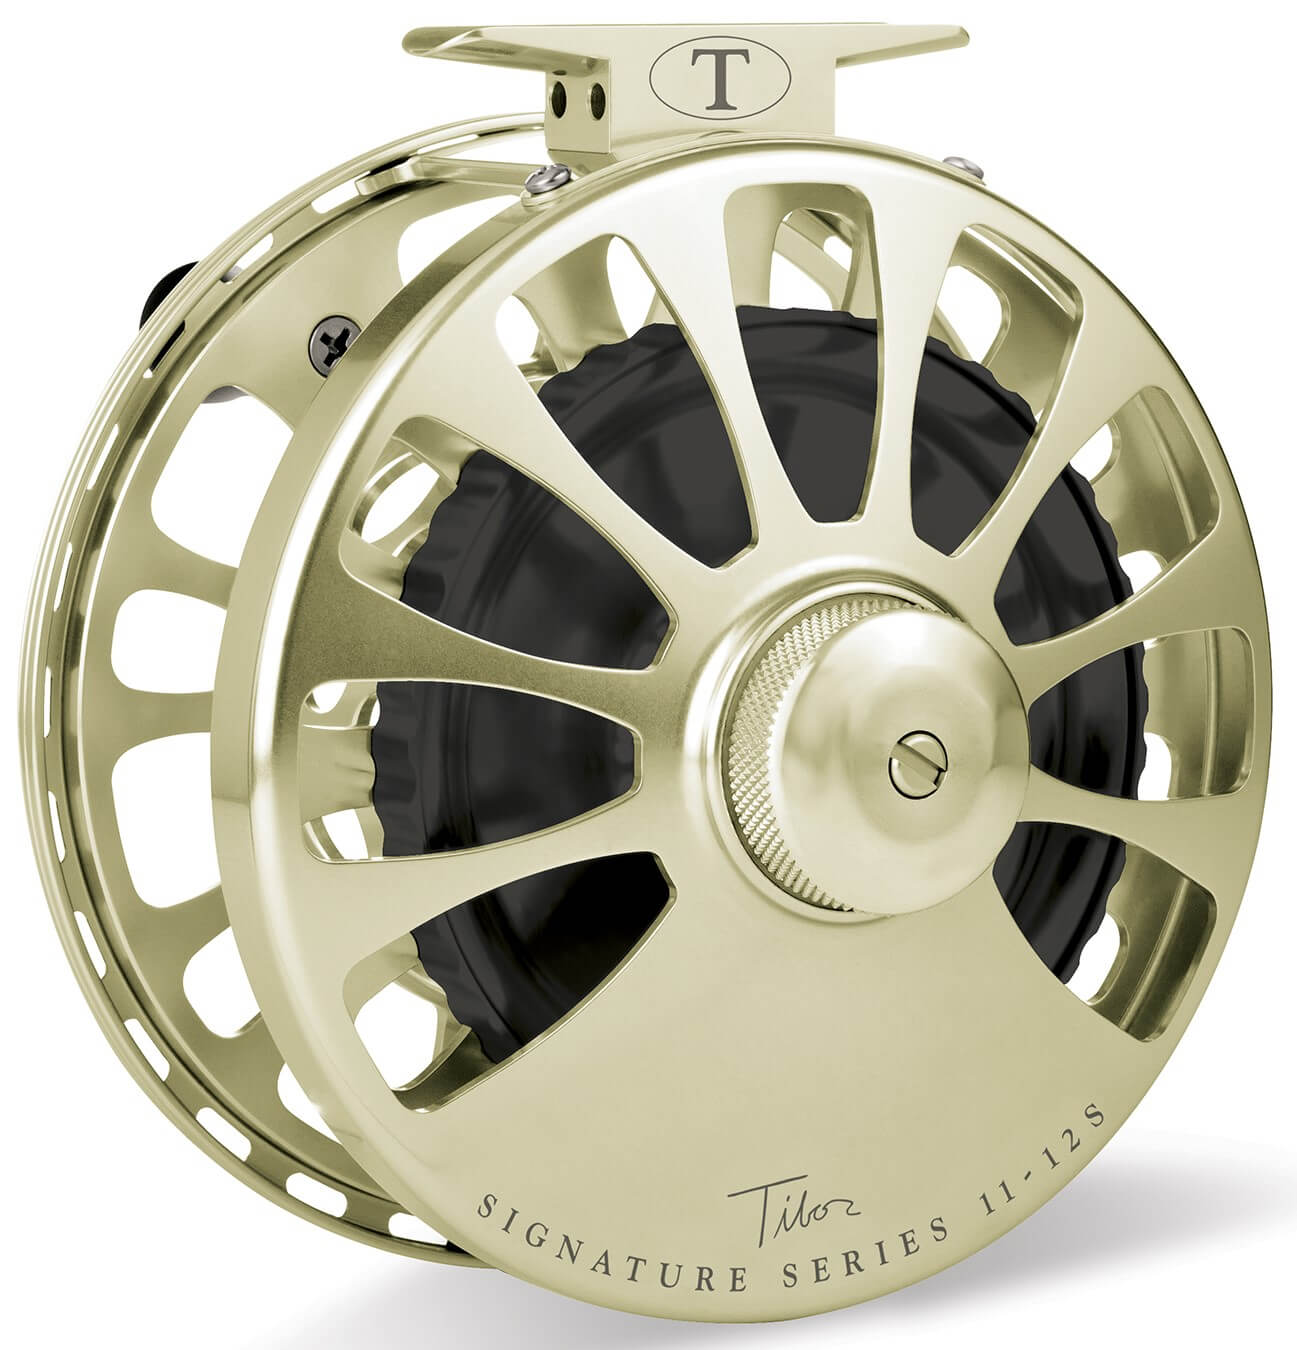 Tibor Signature Series saltwater fly reels -- All Sizes in Stock